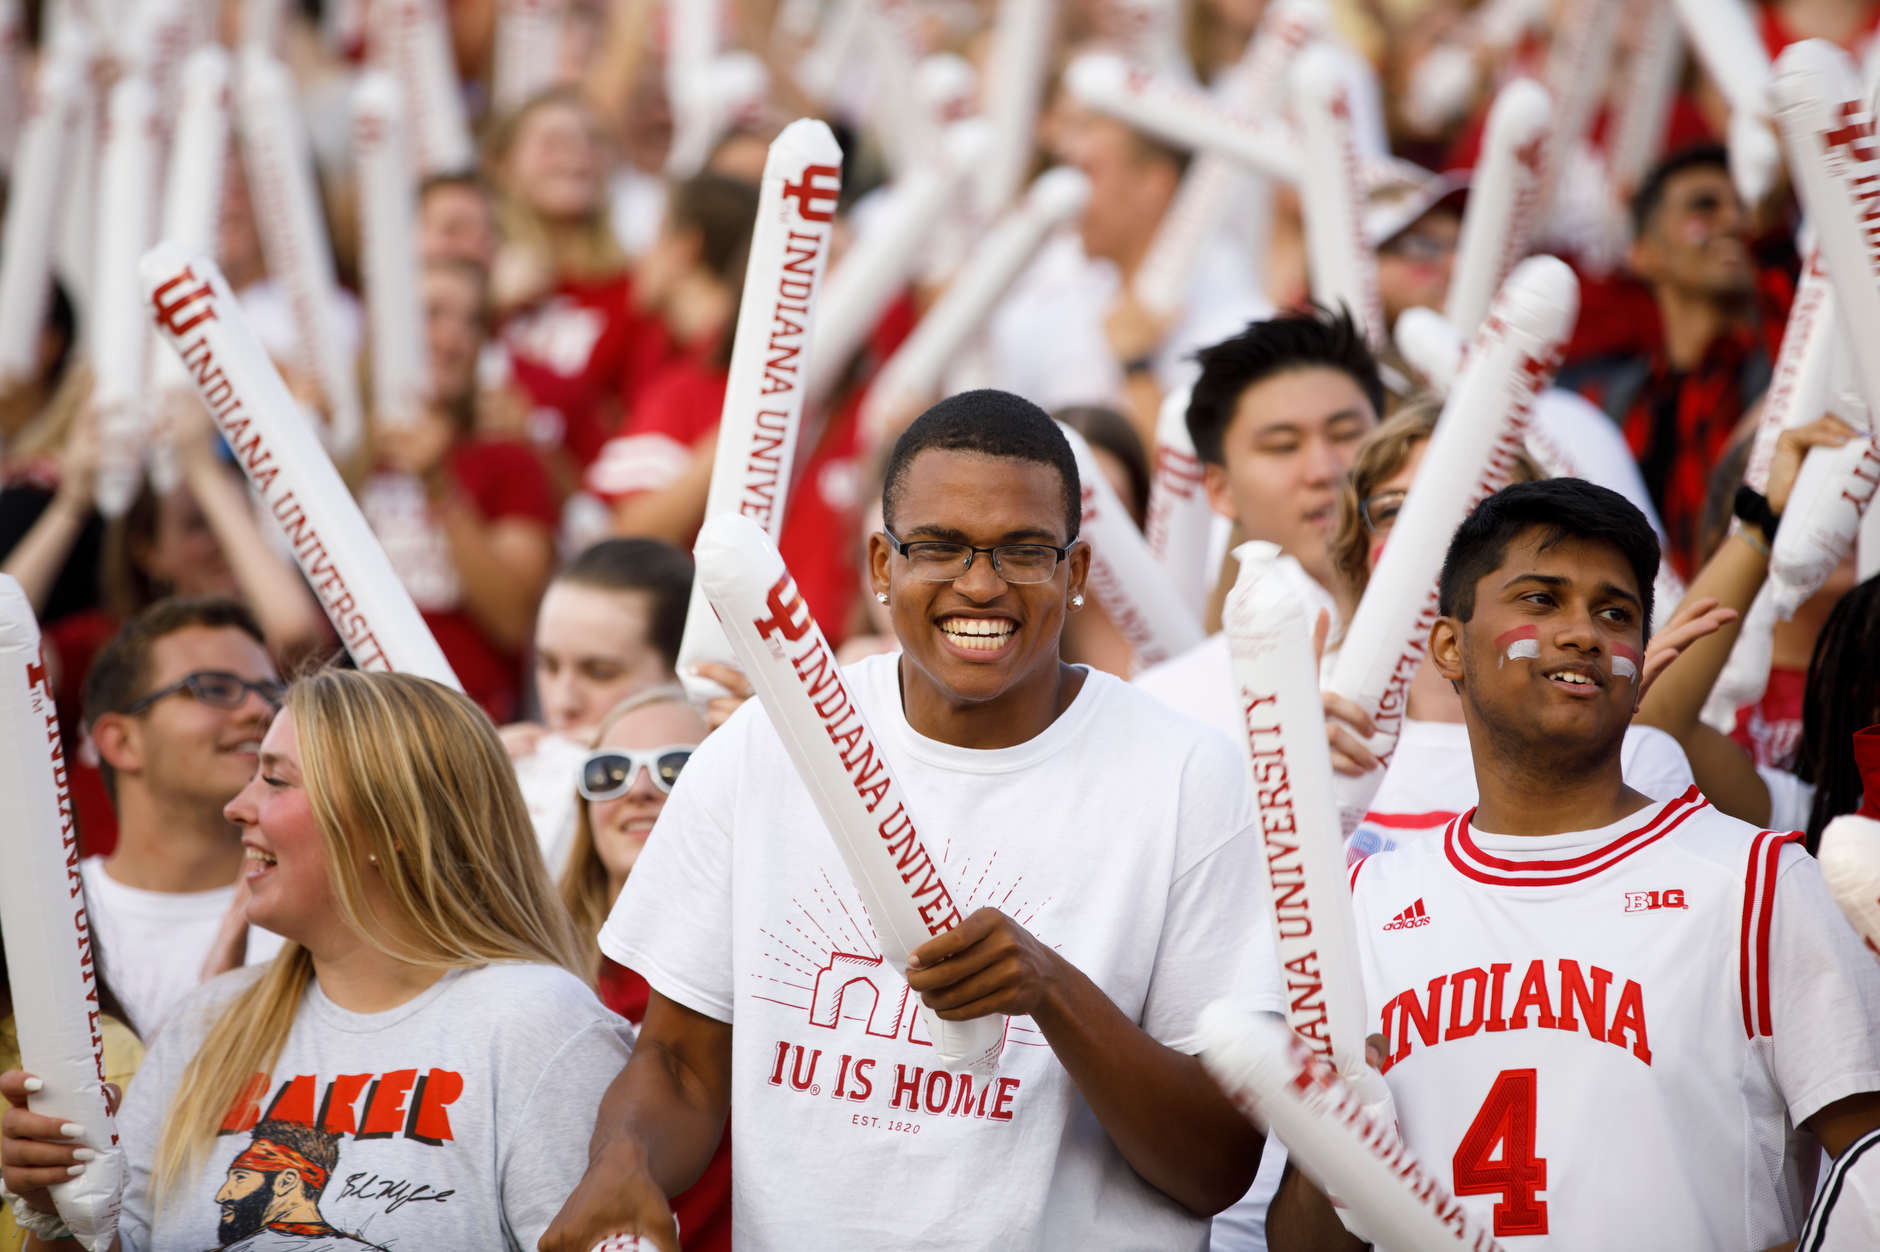 Students cheer during the Traditions and Spirit of IU at Memorial Stadium on Friday, Aug. 23, 2019. (James Brosher/Indiana University)